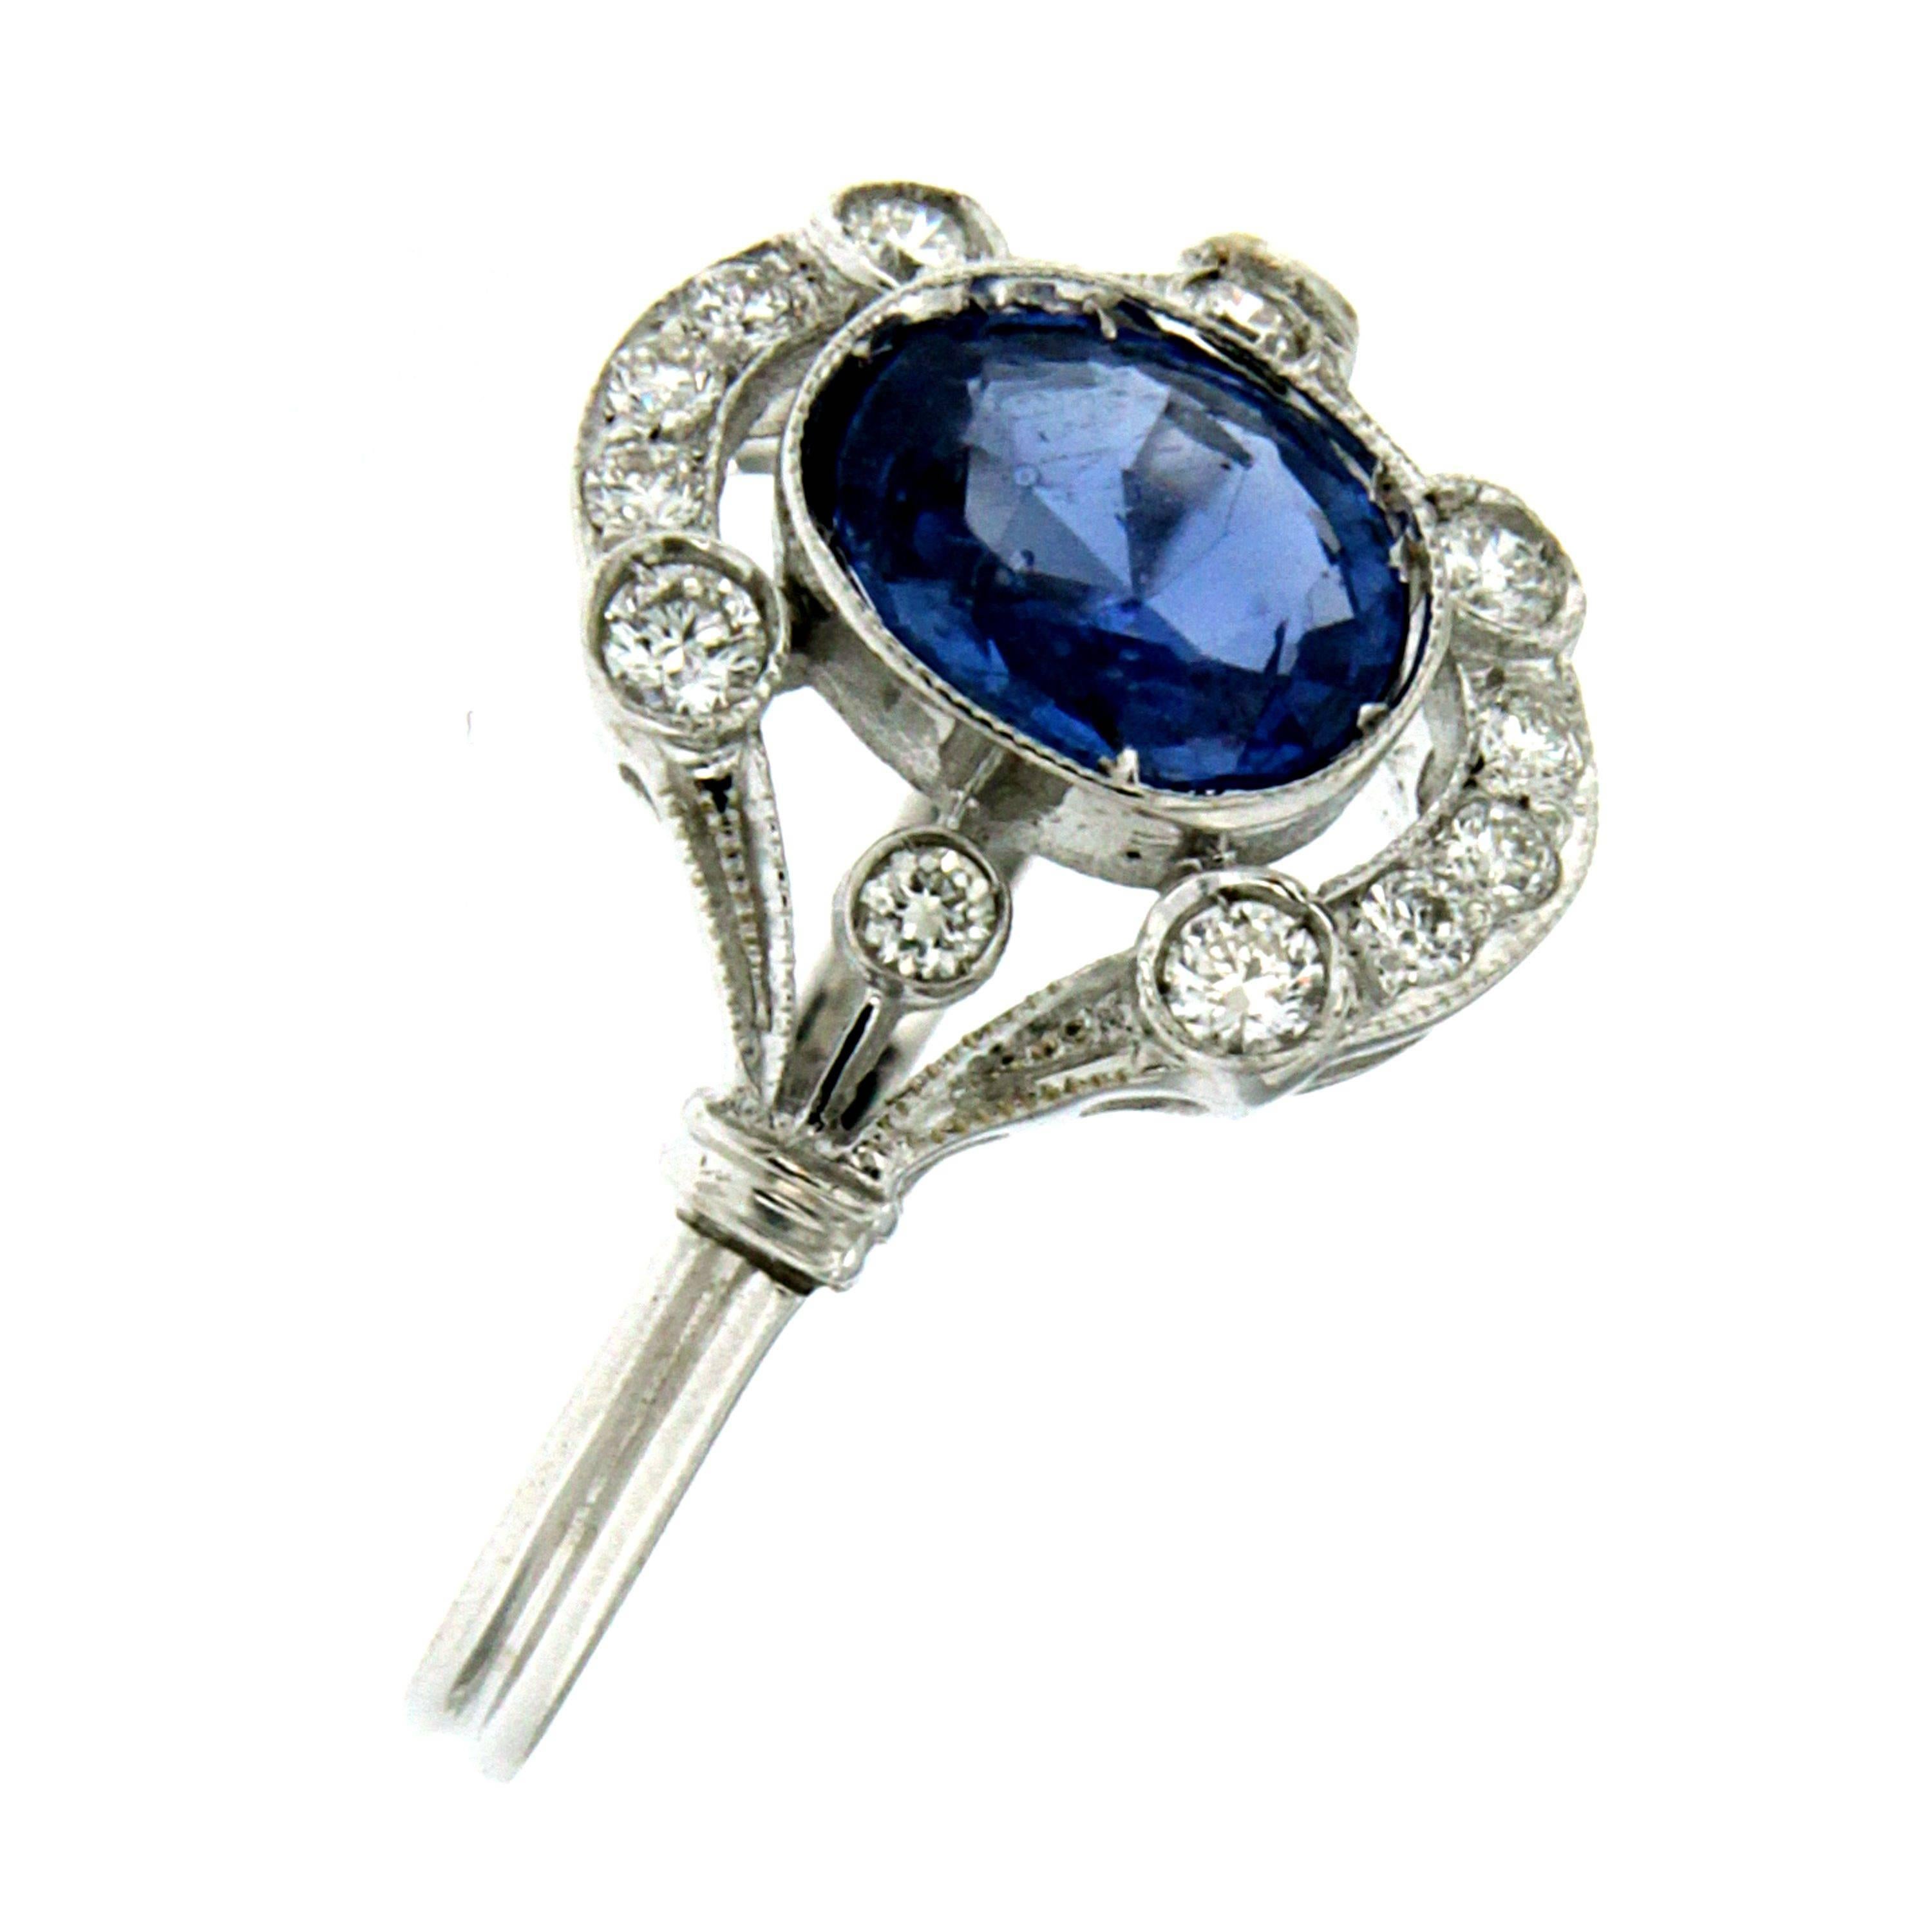 This beautiful Sapphire and Diamond Art Deco ring is hand crafted in solid 18k white gold and engraved in typical Art Deco design with Millegrain decorated aplique. 
It is set with a pleasant Blue oval cut Natural Ceylon Sapphire weighing 1.40